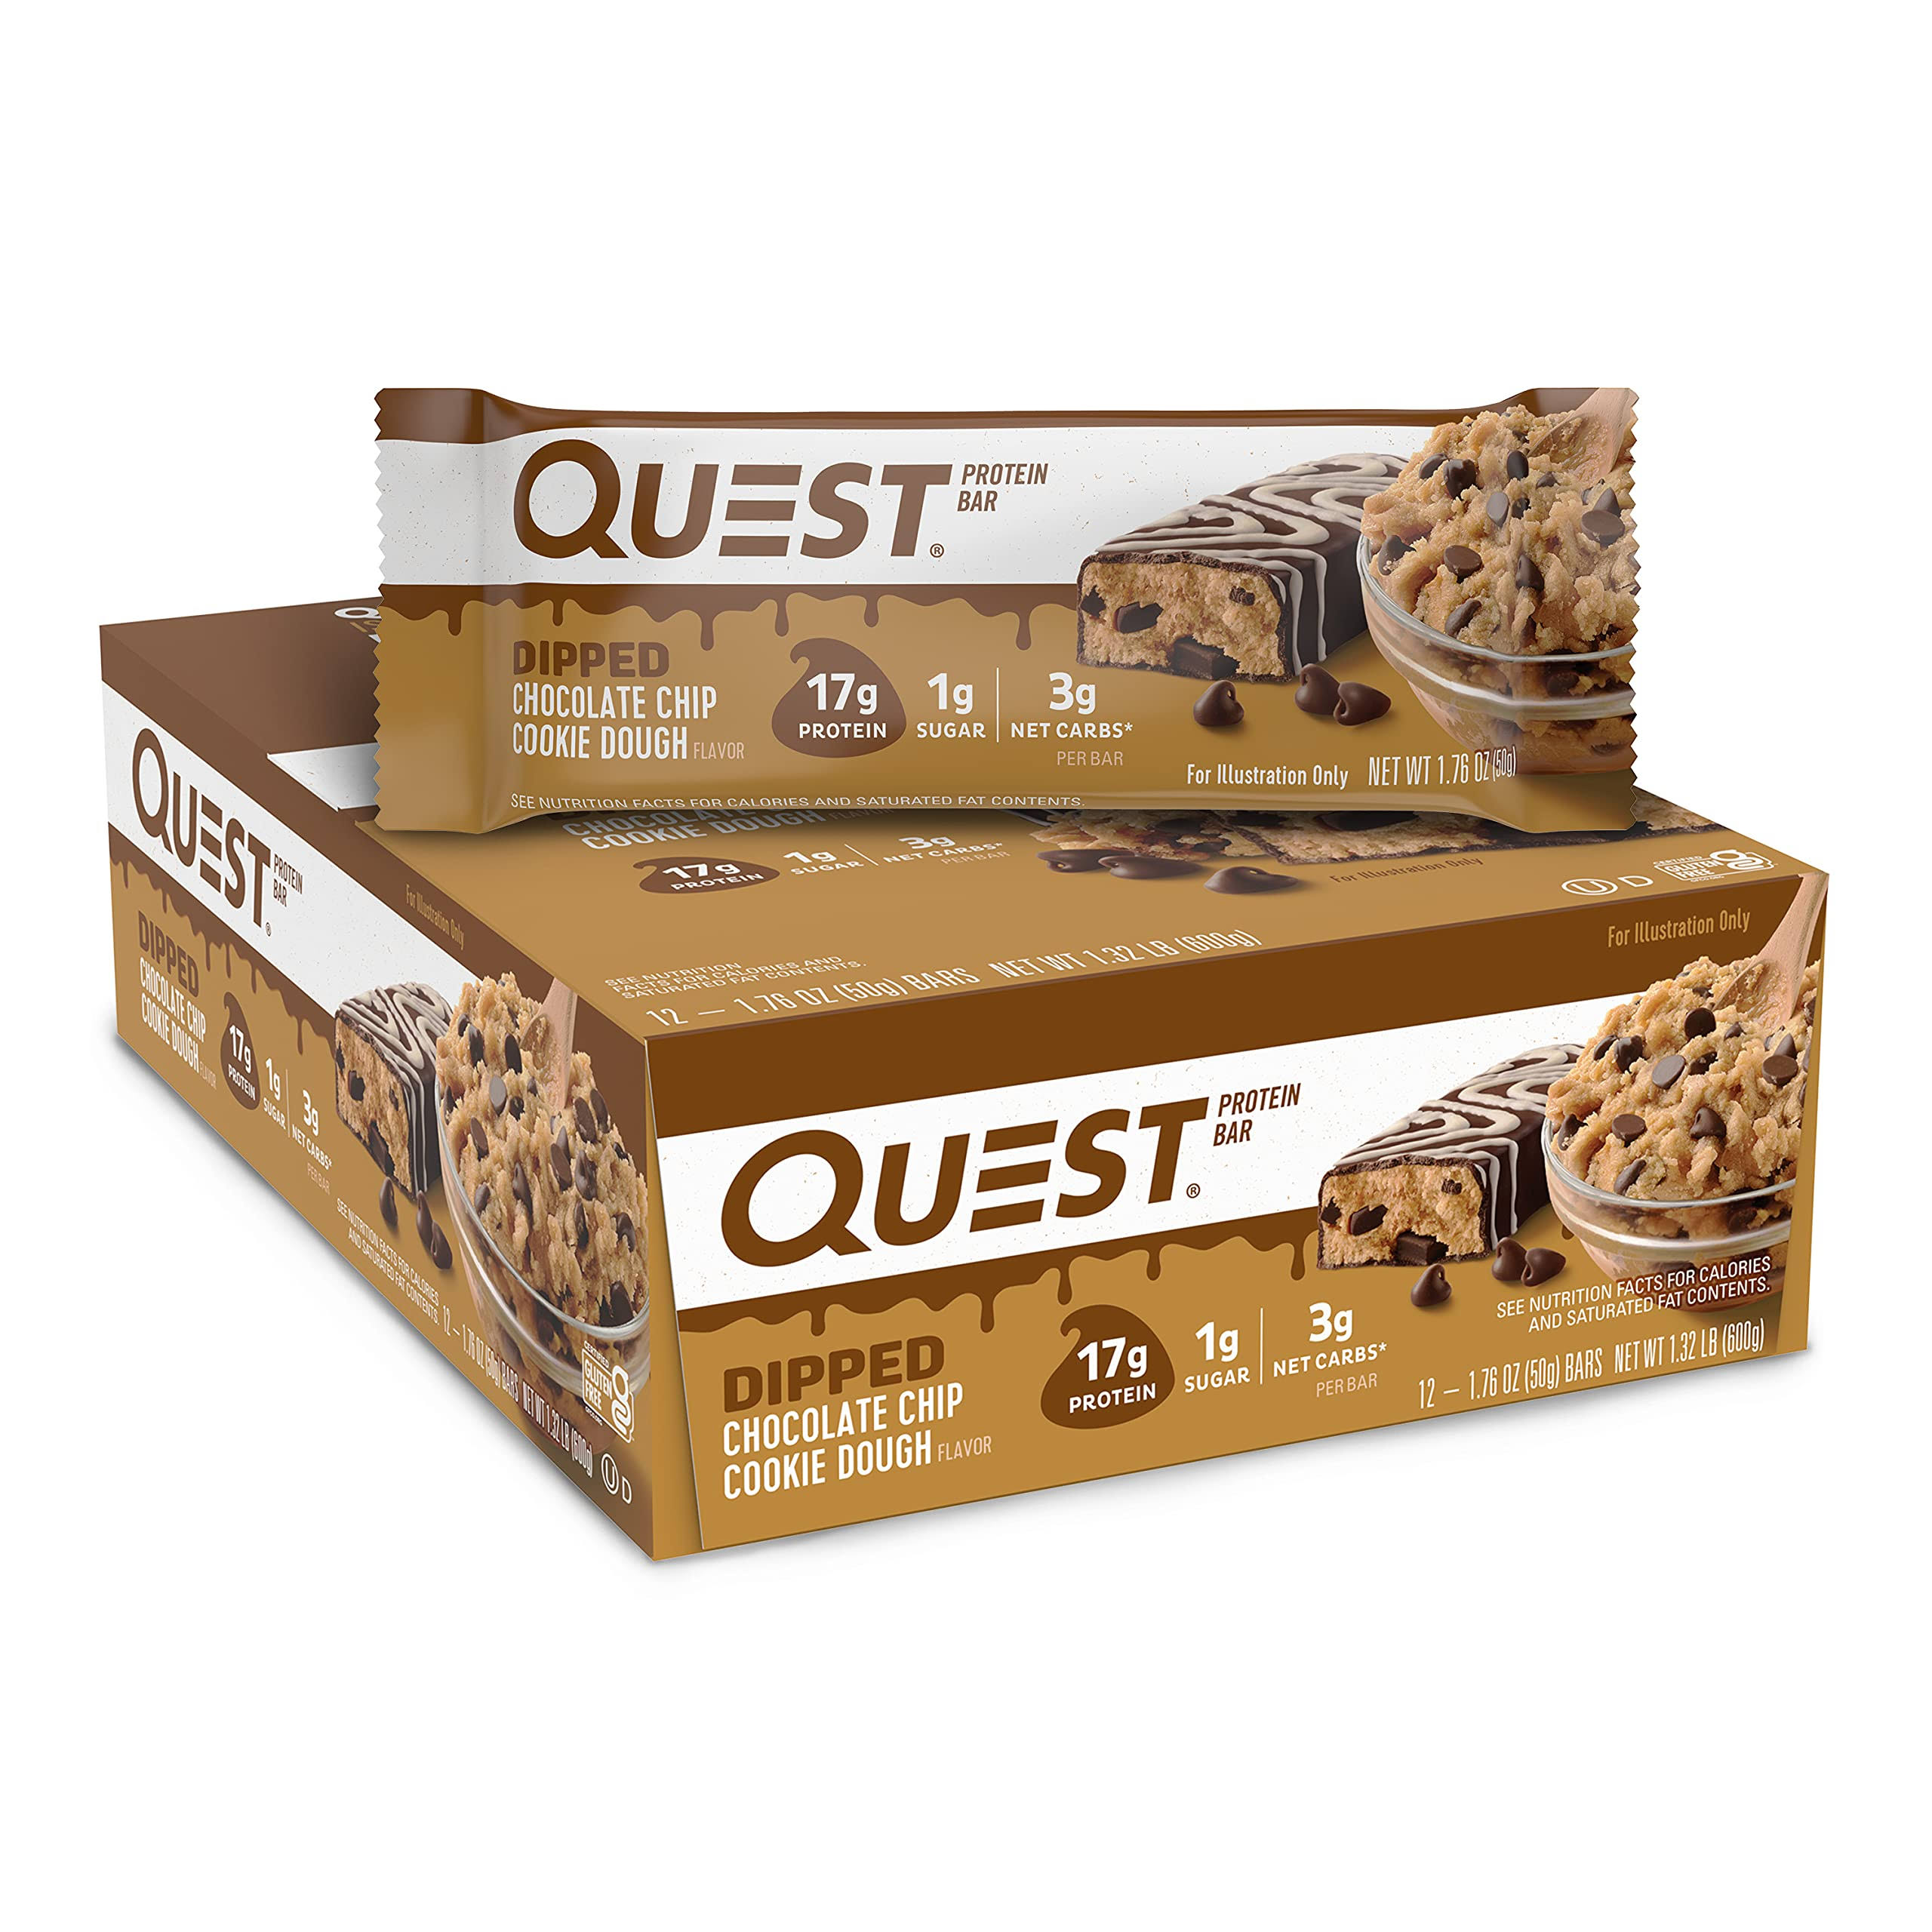 Quest Protein Bar, Chocolate Chip Cookie Dough Flavor, Dipped - 12 pack, 1.76 oz bars